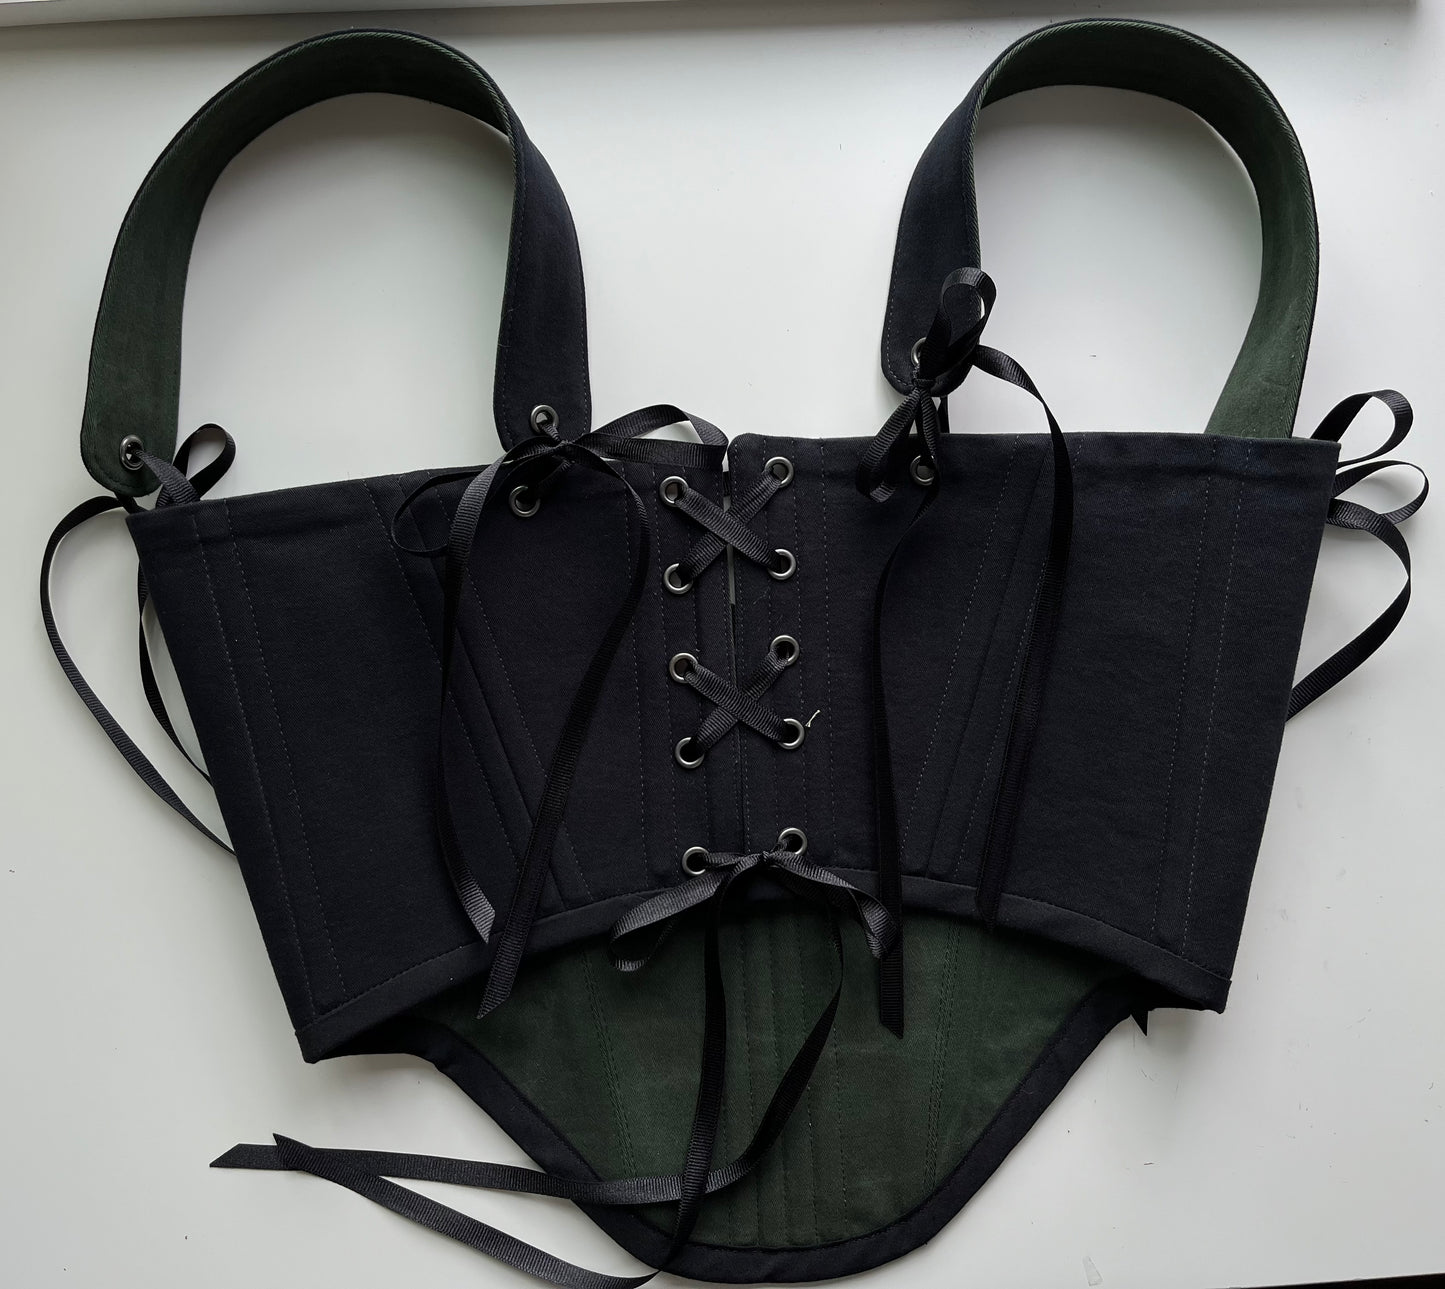 Black/ marble army green underbust corsage